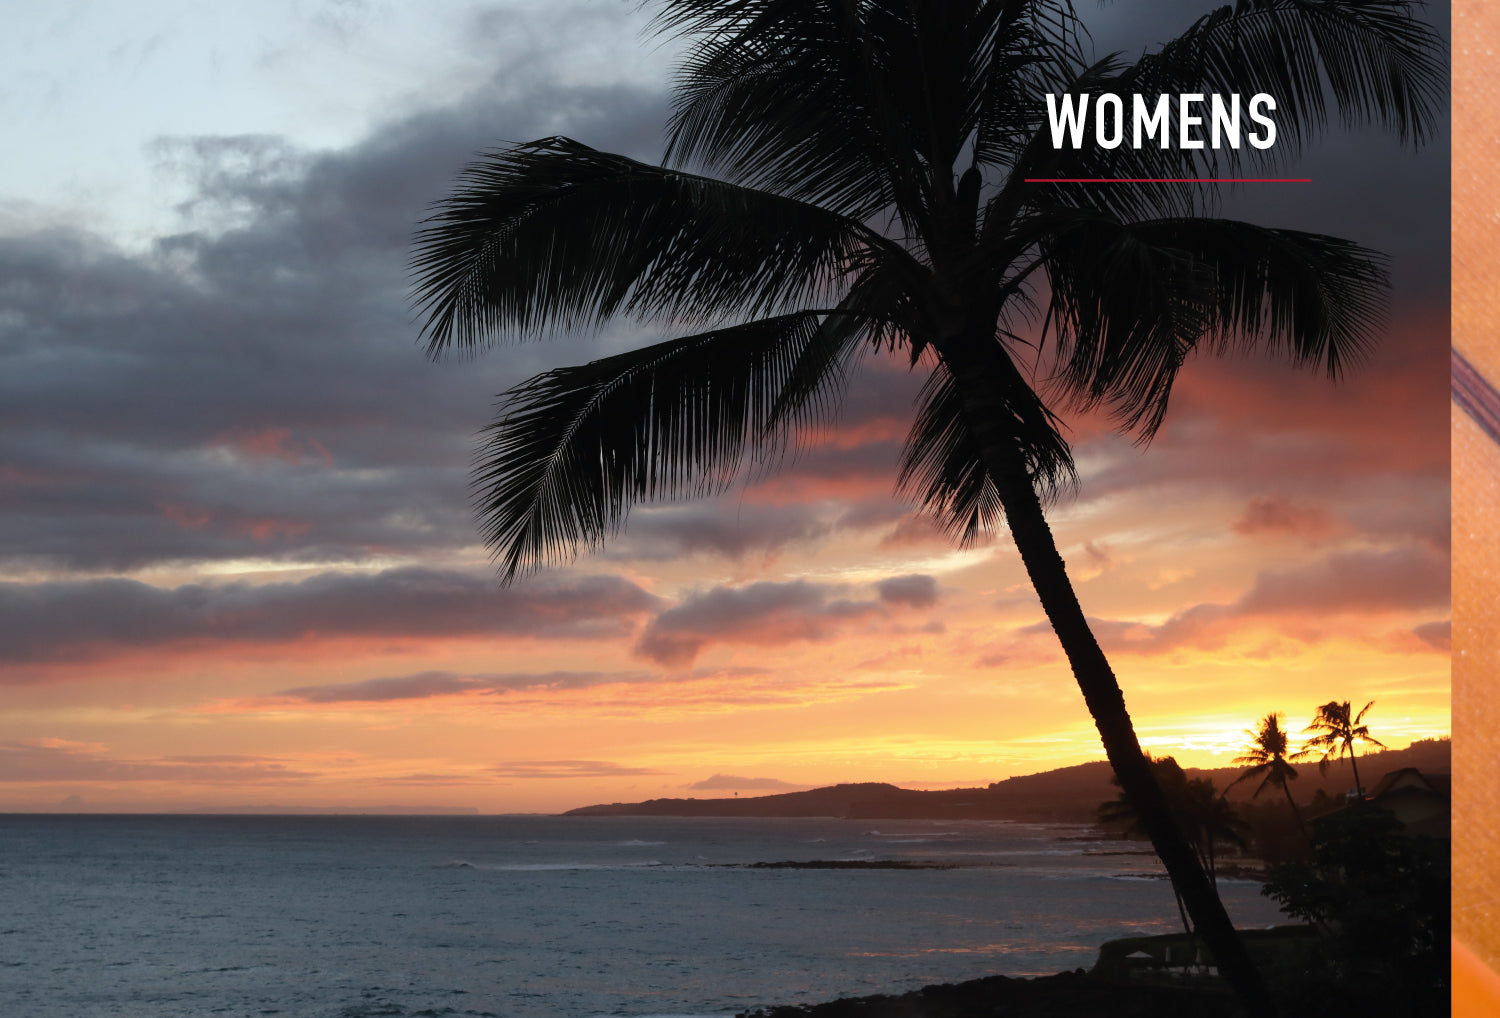 Womens Category. Photo of palm trees and beach at sunset in Kauai.